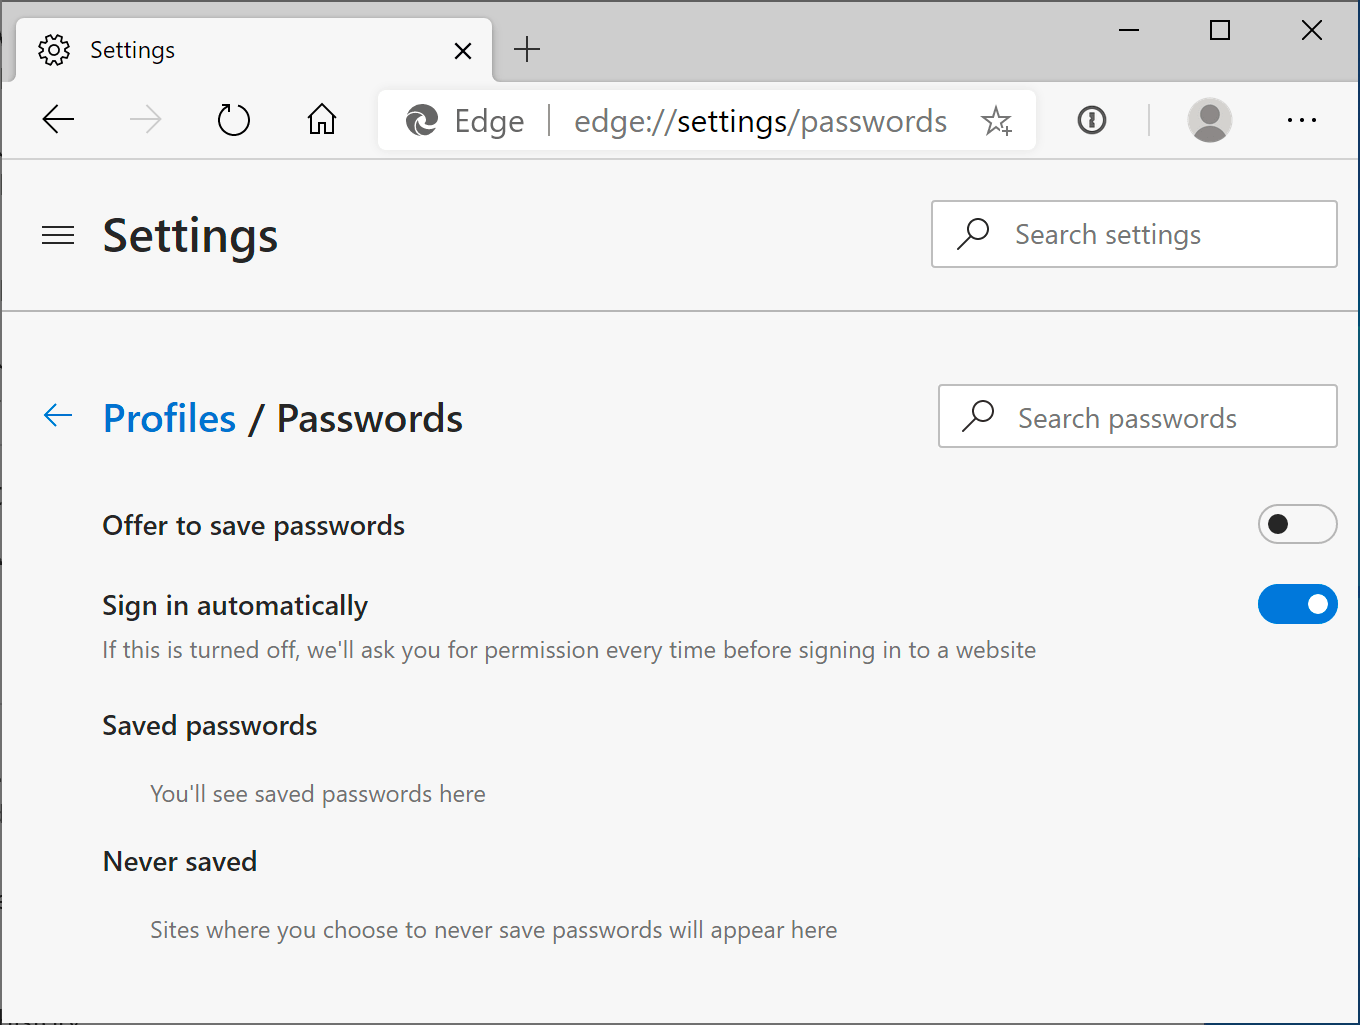 Turn off 'Offer to save passwords' on the password settings page in Microsoft Edge